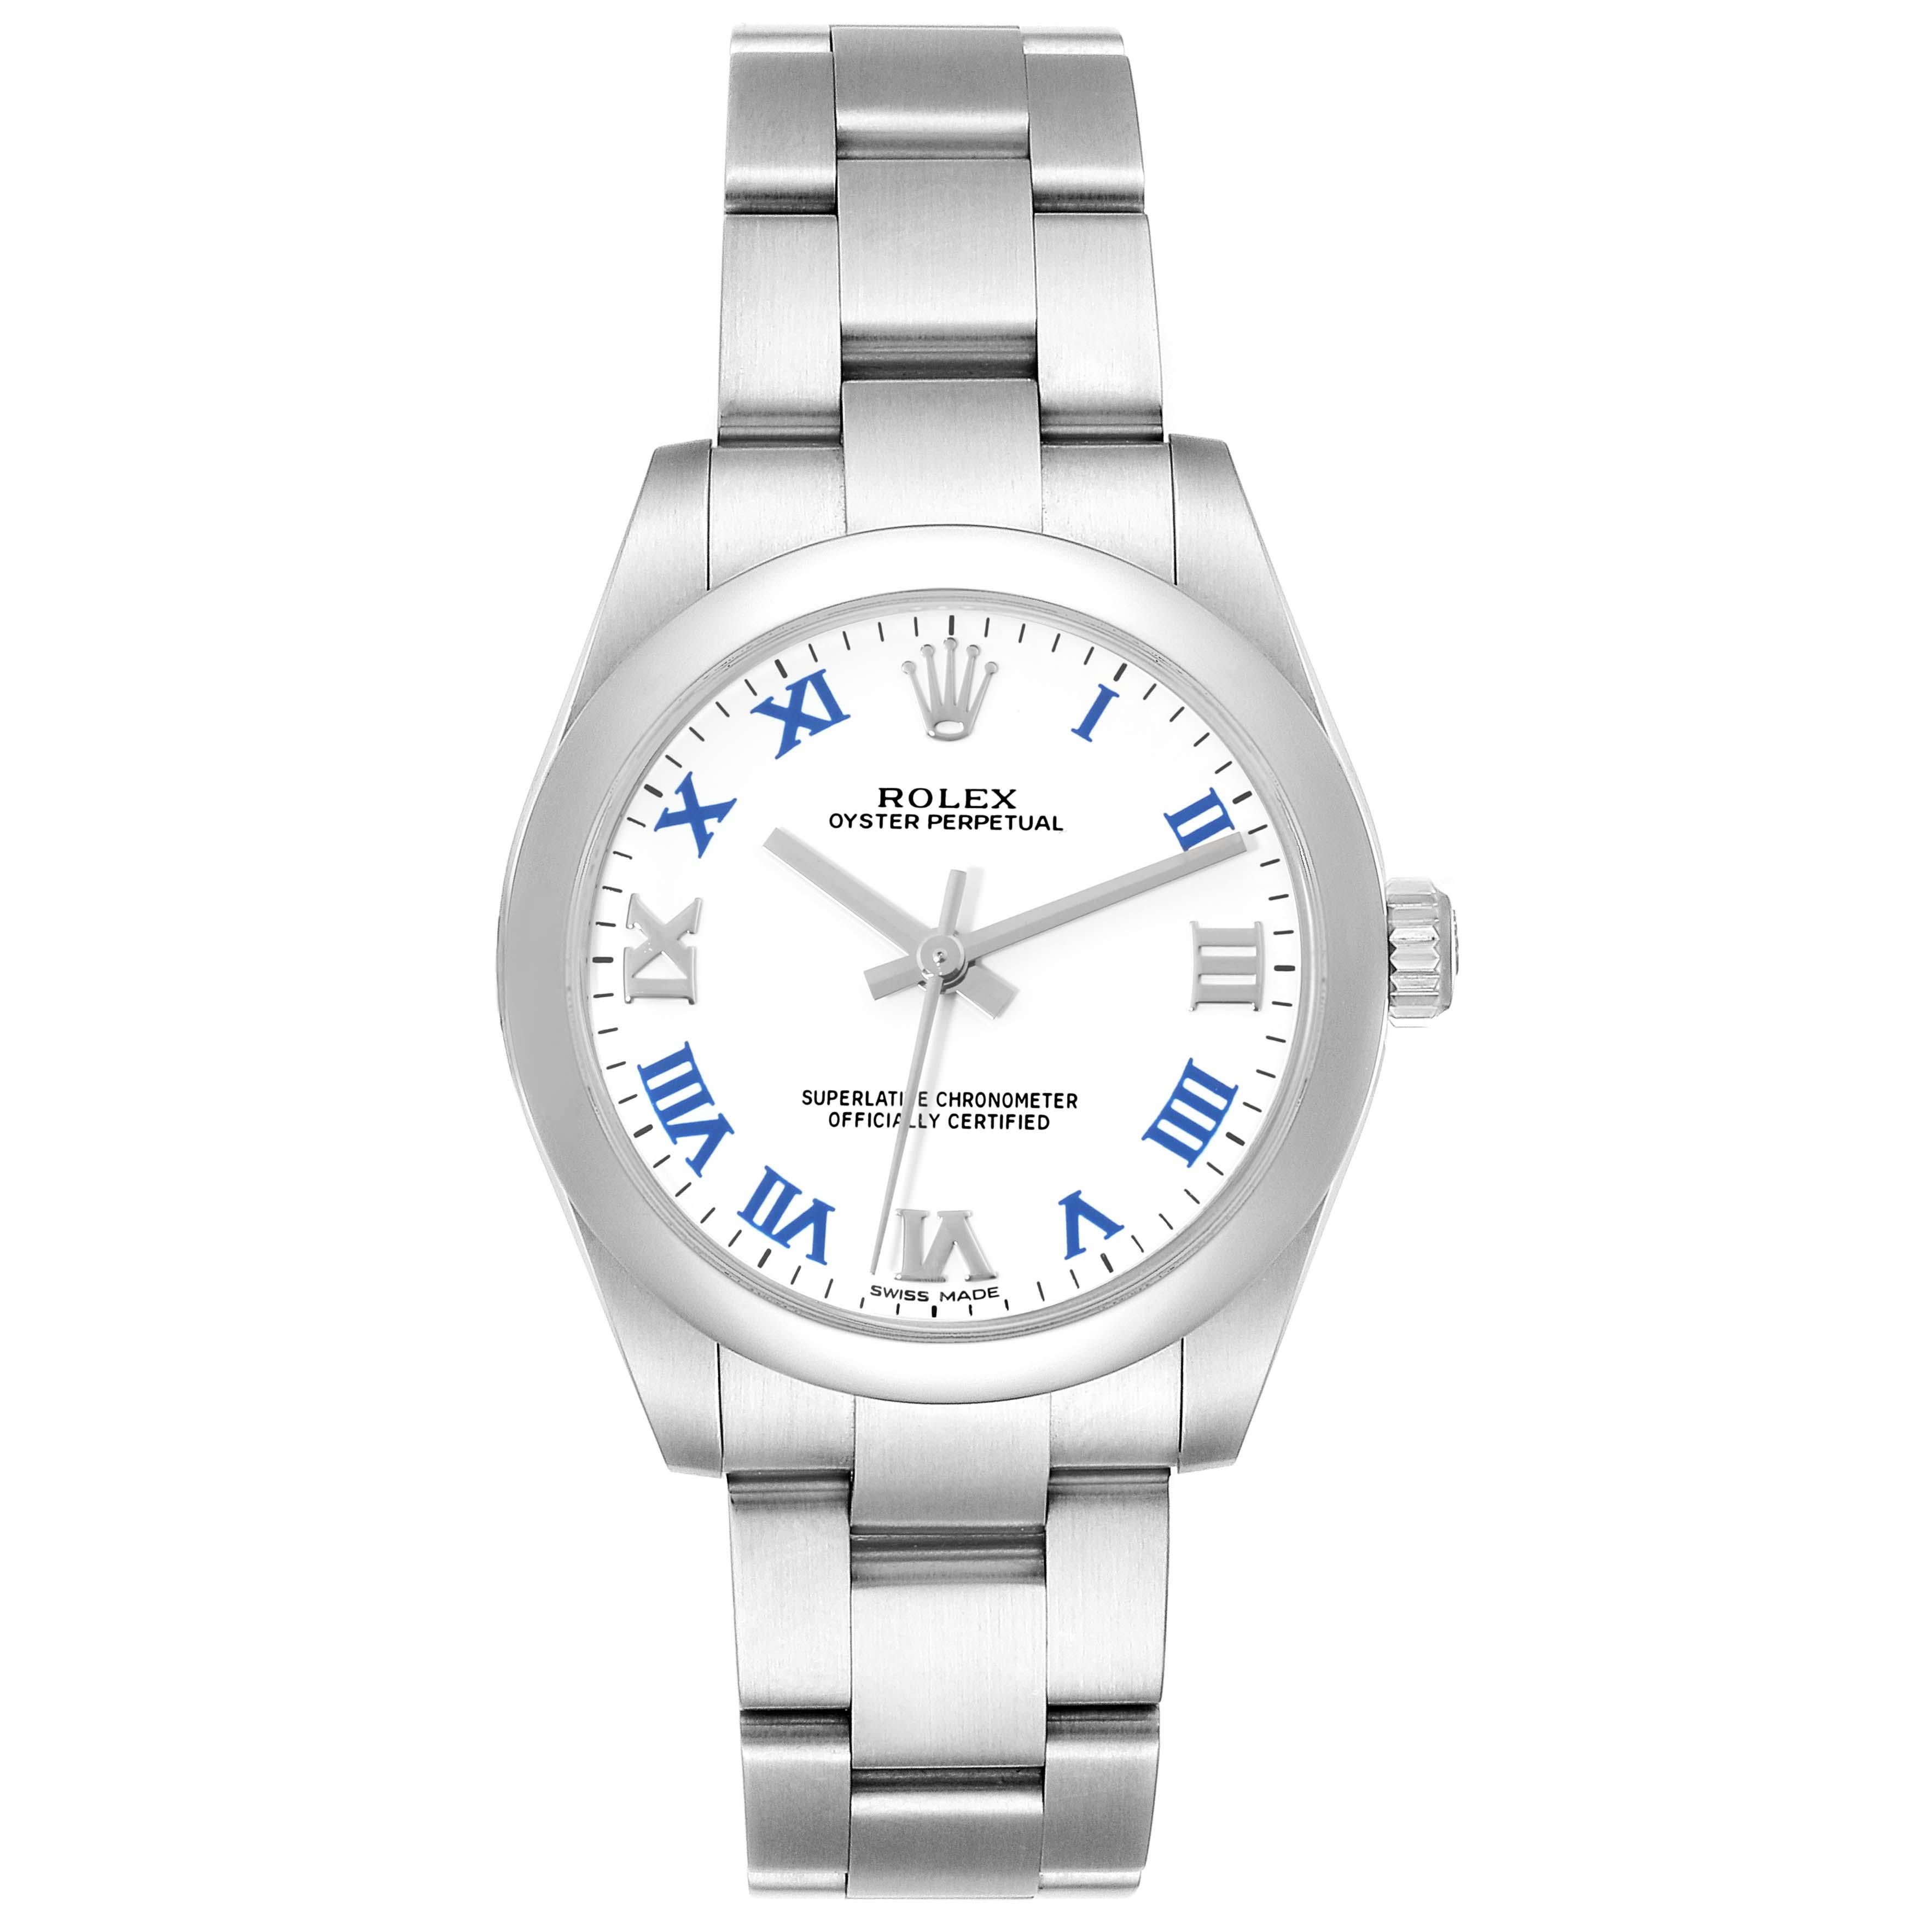 Rolex Oyster Perpetual Midsize White Dial Steel Ladies Watch 177200 Box Card. Officially certified chronometer automatic self-winding movement. Stainless steel oyster case 31.0 mm in diameter. Rolex logo on the crown. Stainless steel smooth domed